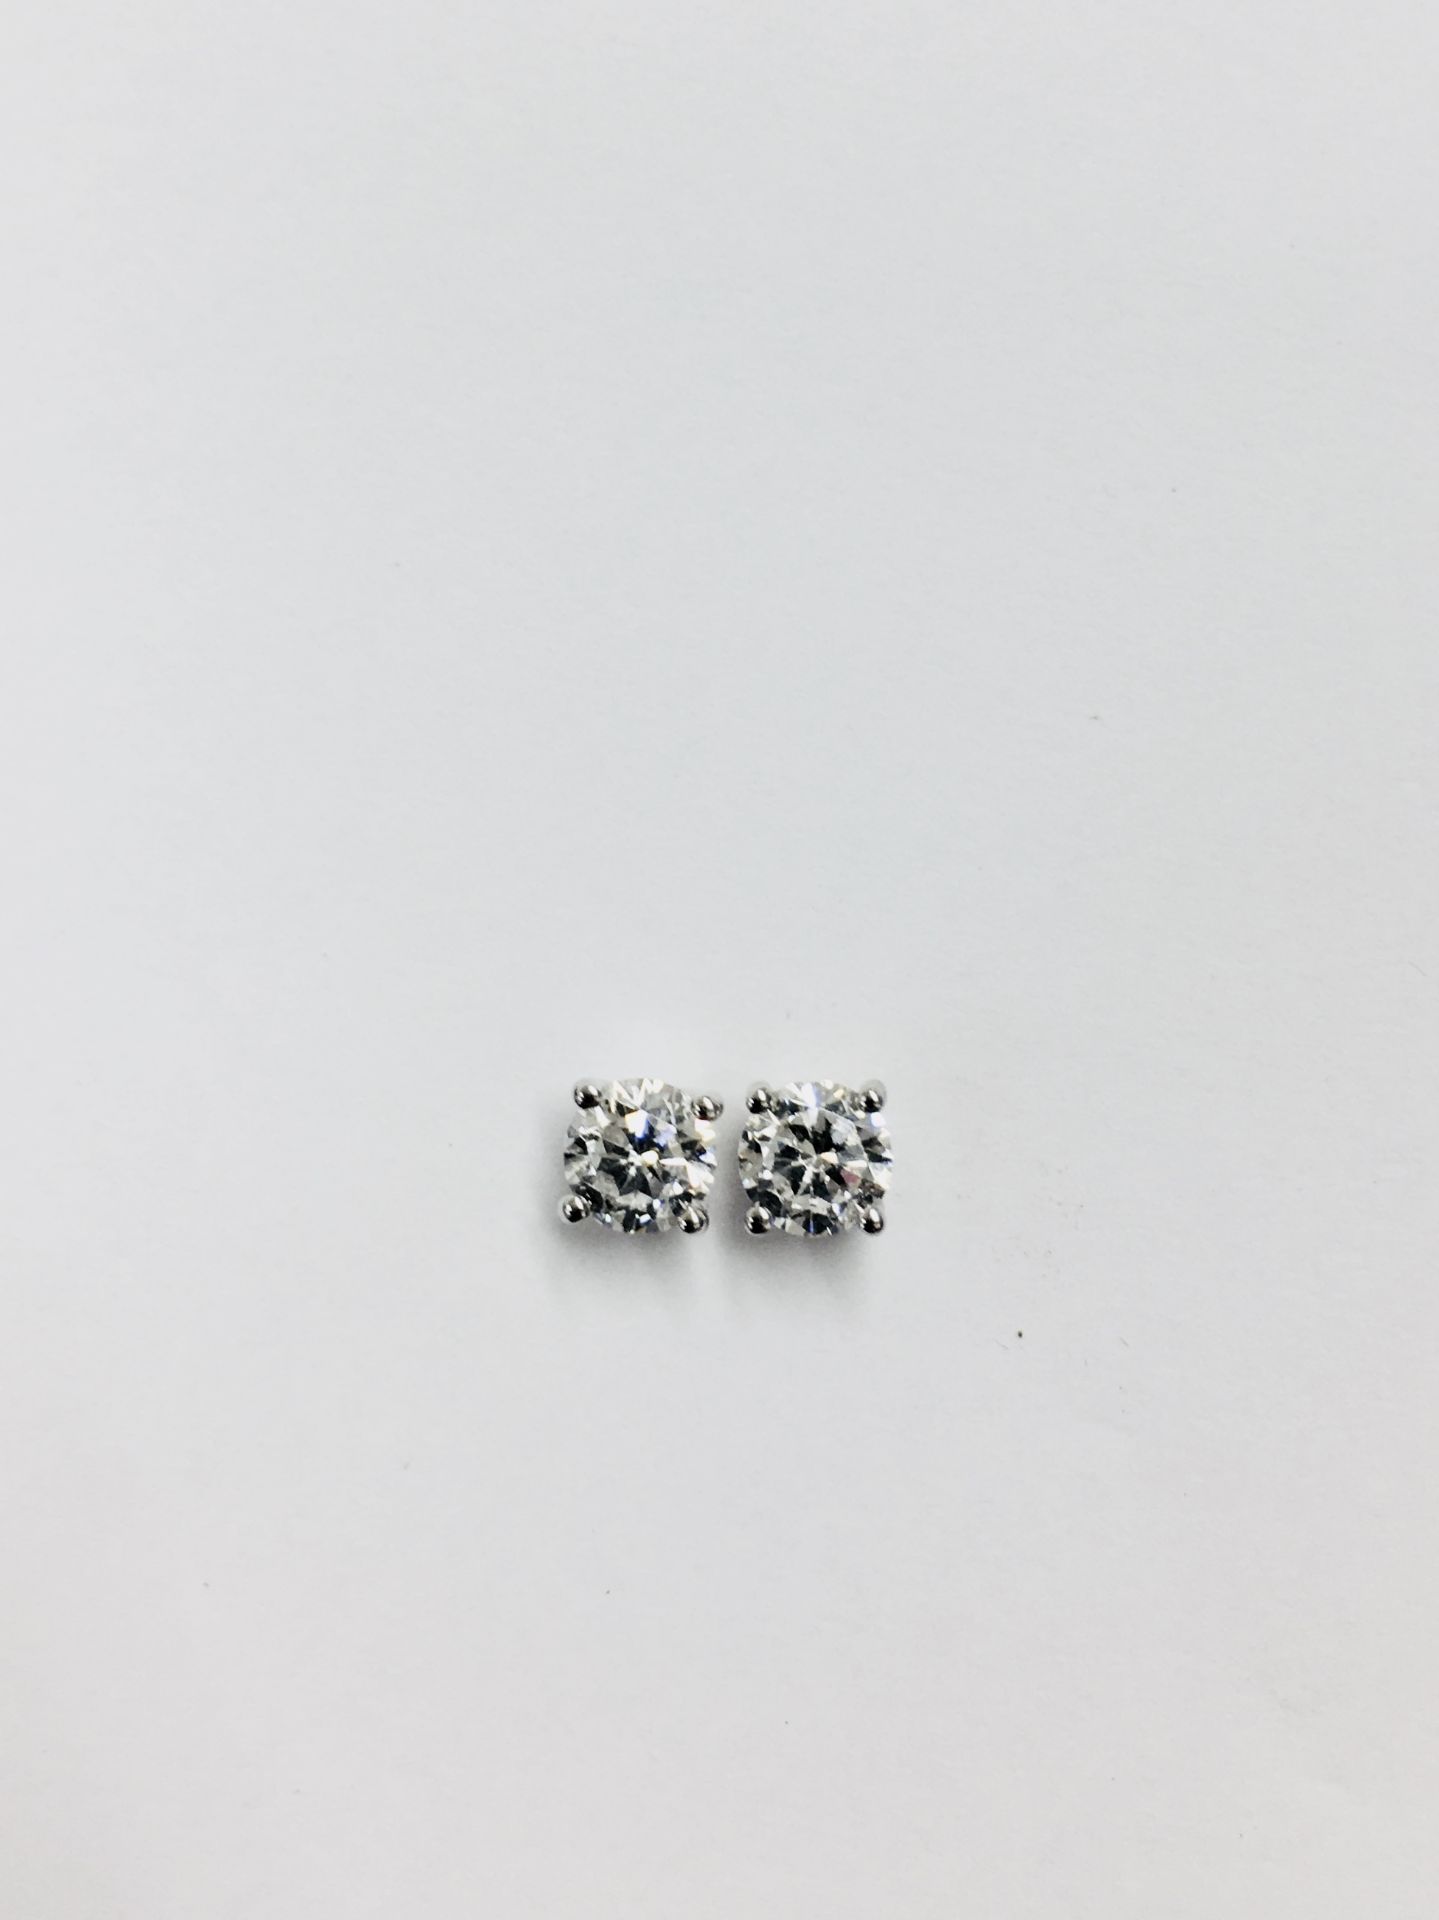 1.00Ct Diamond Solitaire Earrings Set In Platinum. - Image 14 of 15